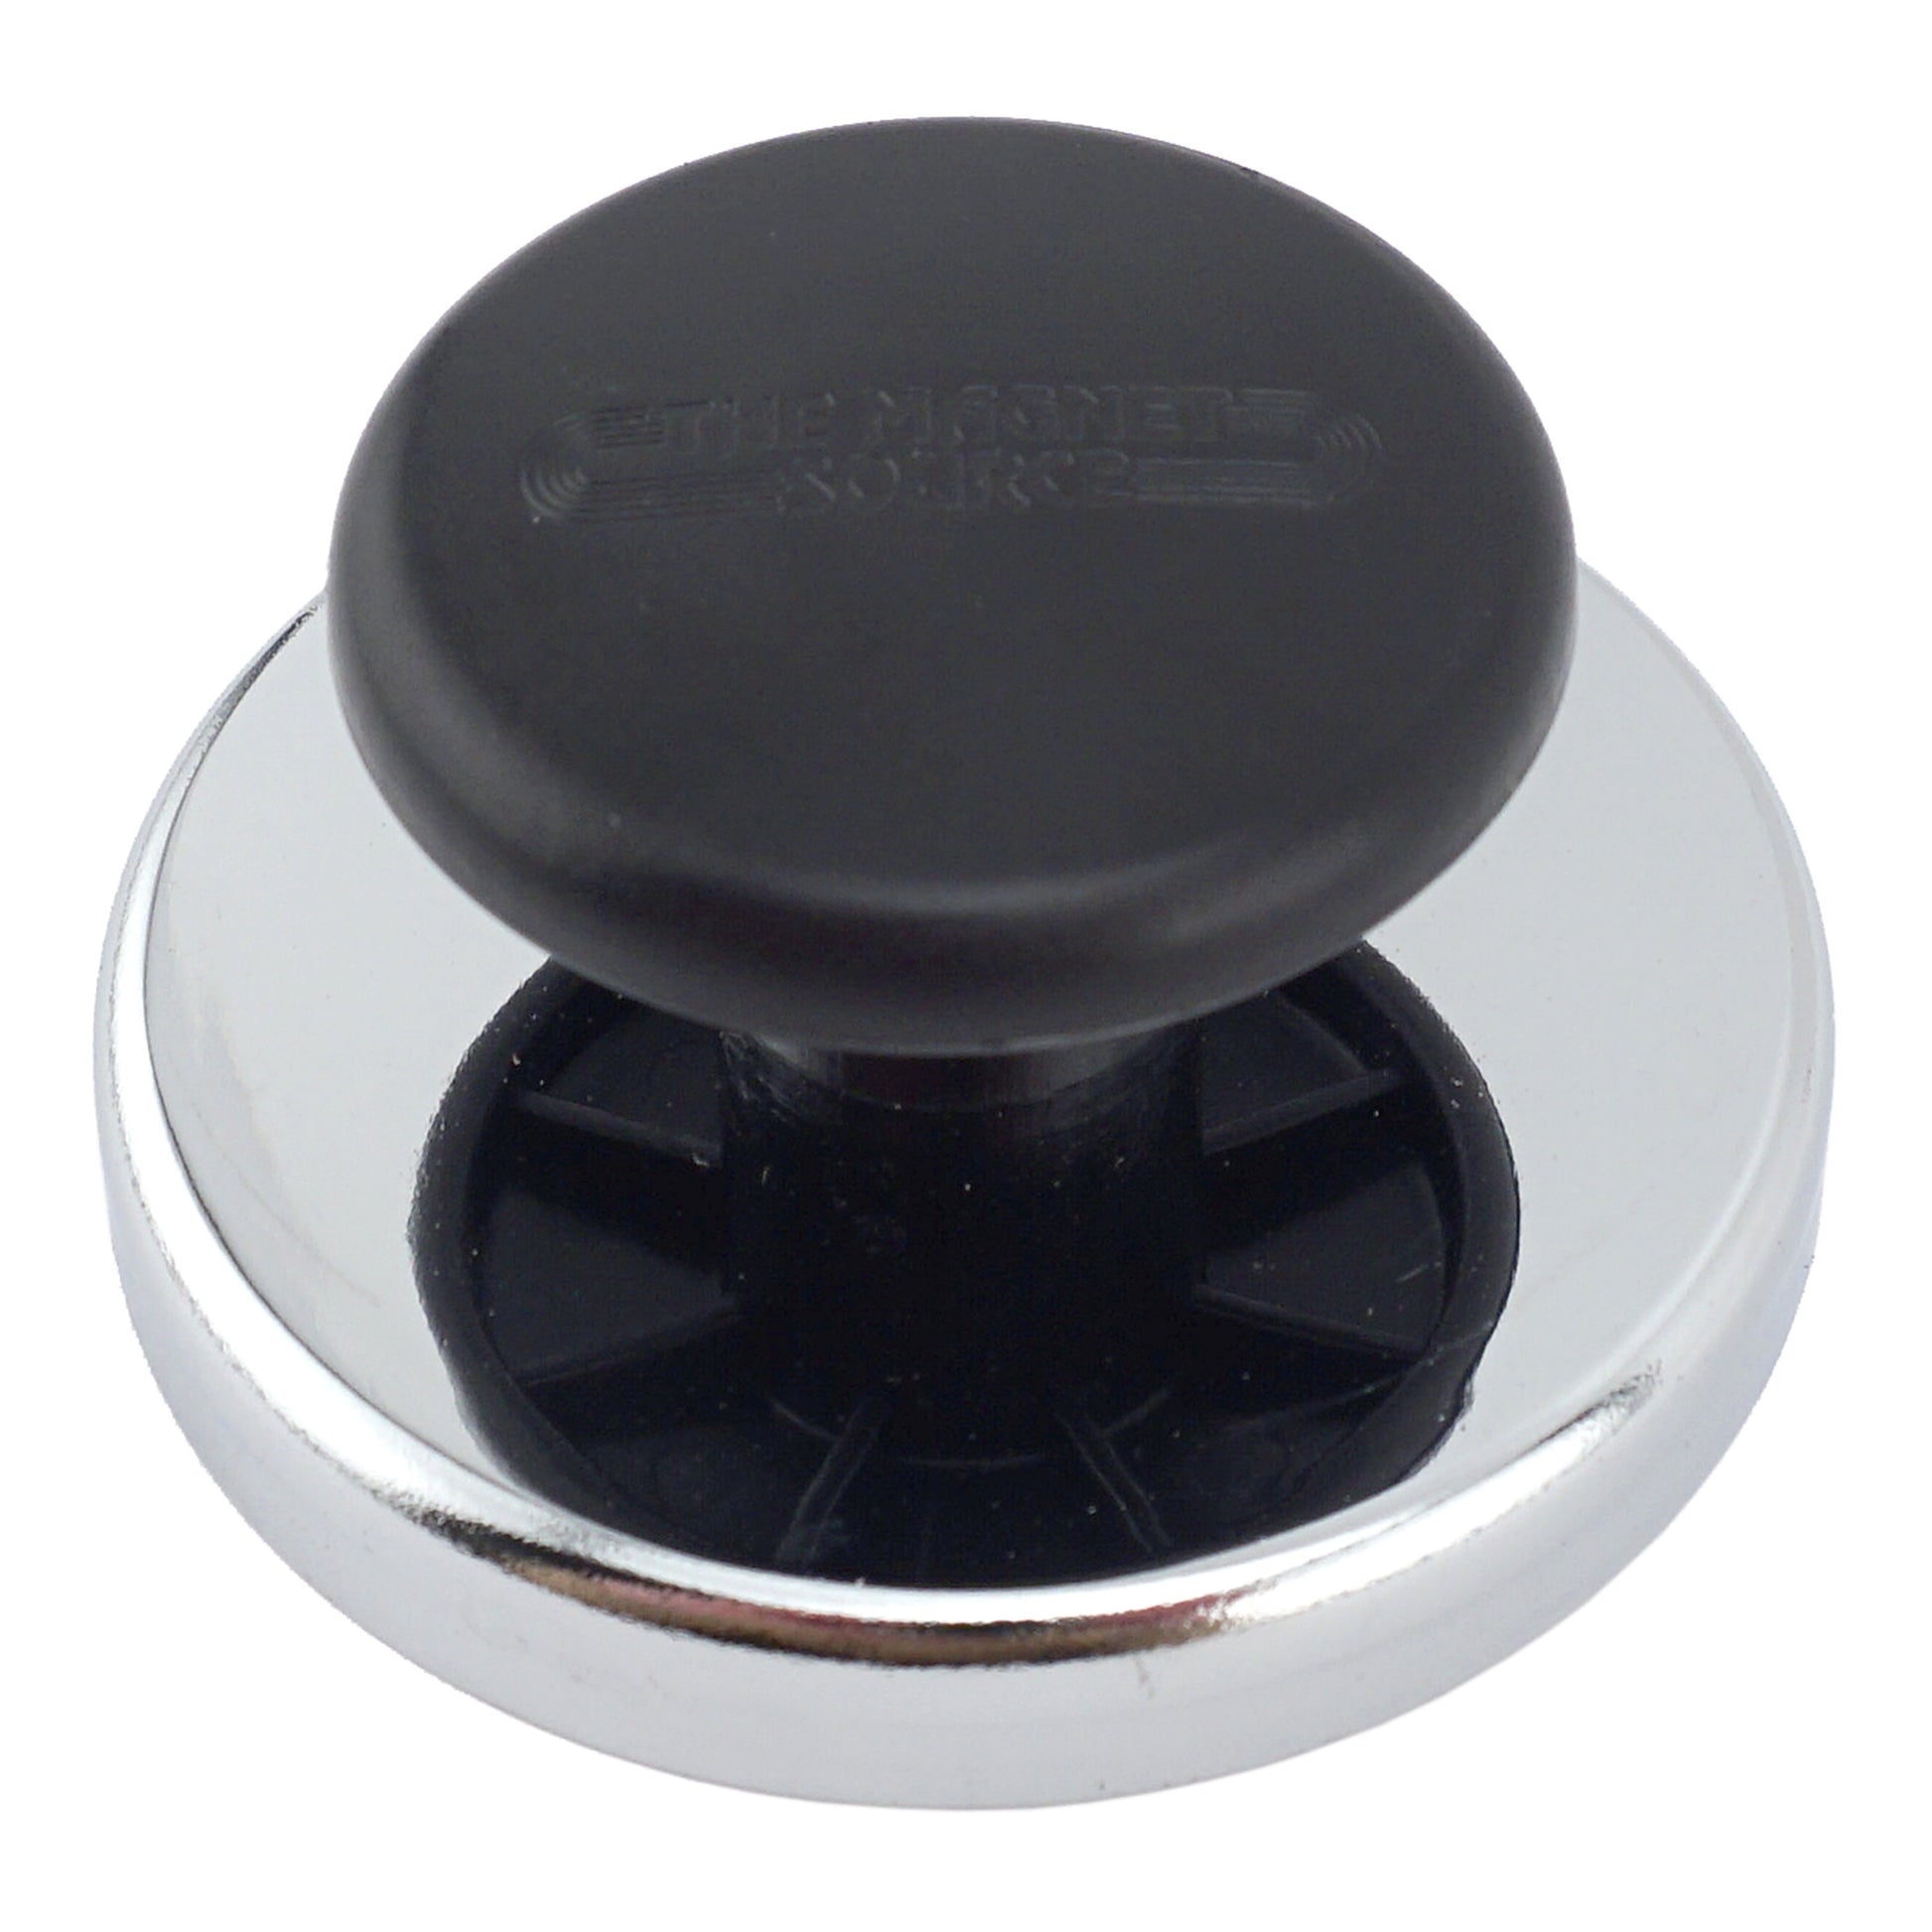 Load image into Gallery viewer, HMKR-70 Ceramic Round Base Magnet with Knob - 45 Degree Angle View